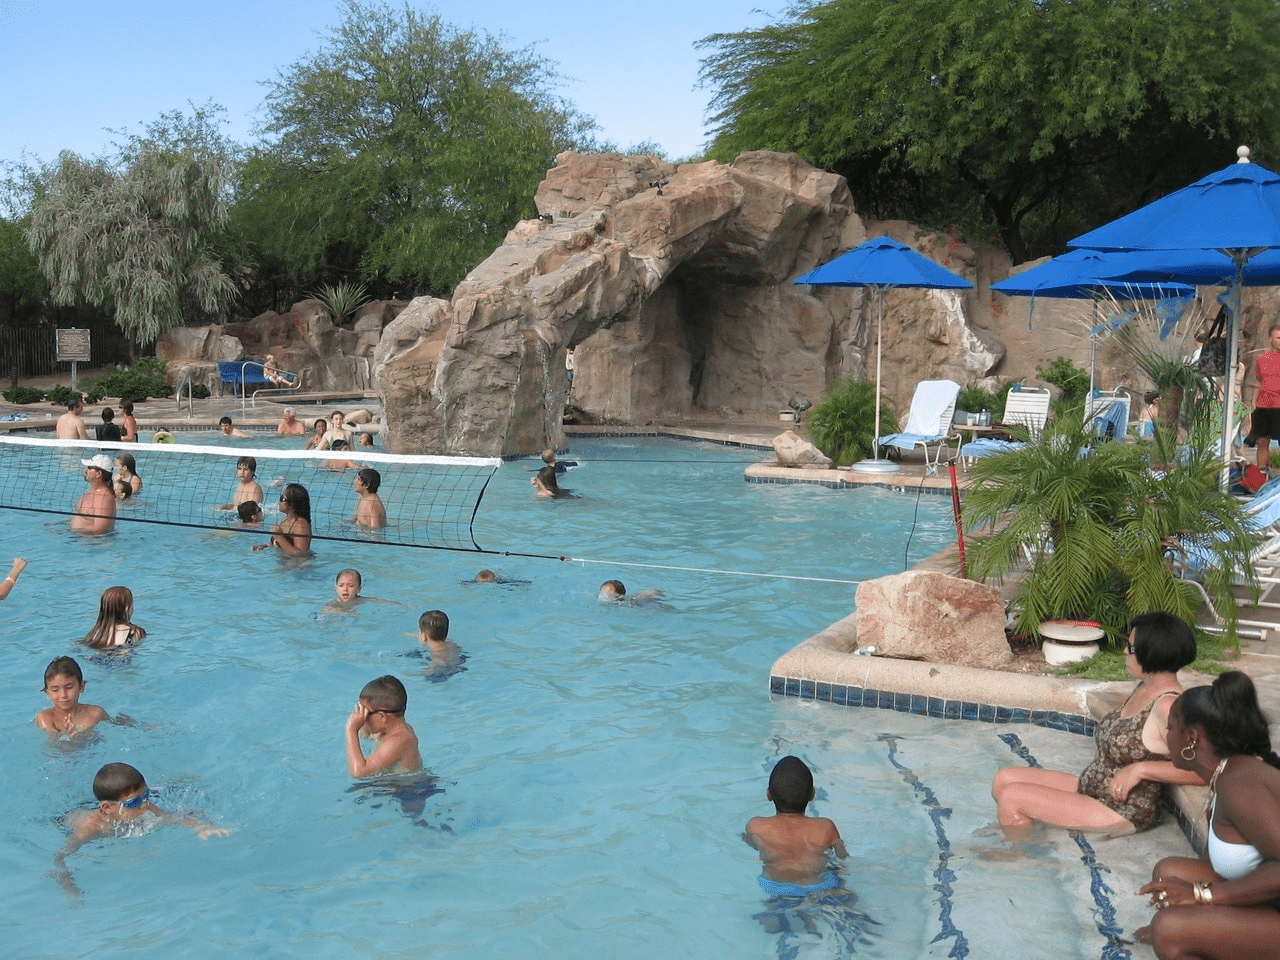 People Playing Aquatic Volleyball